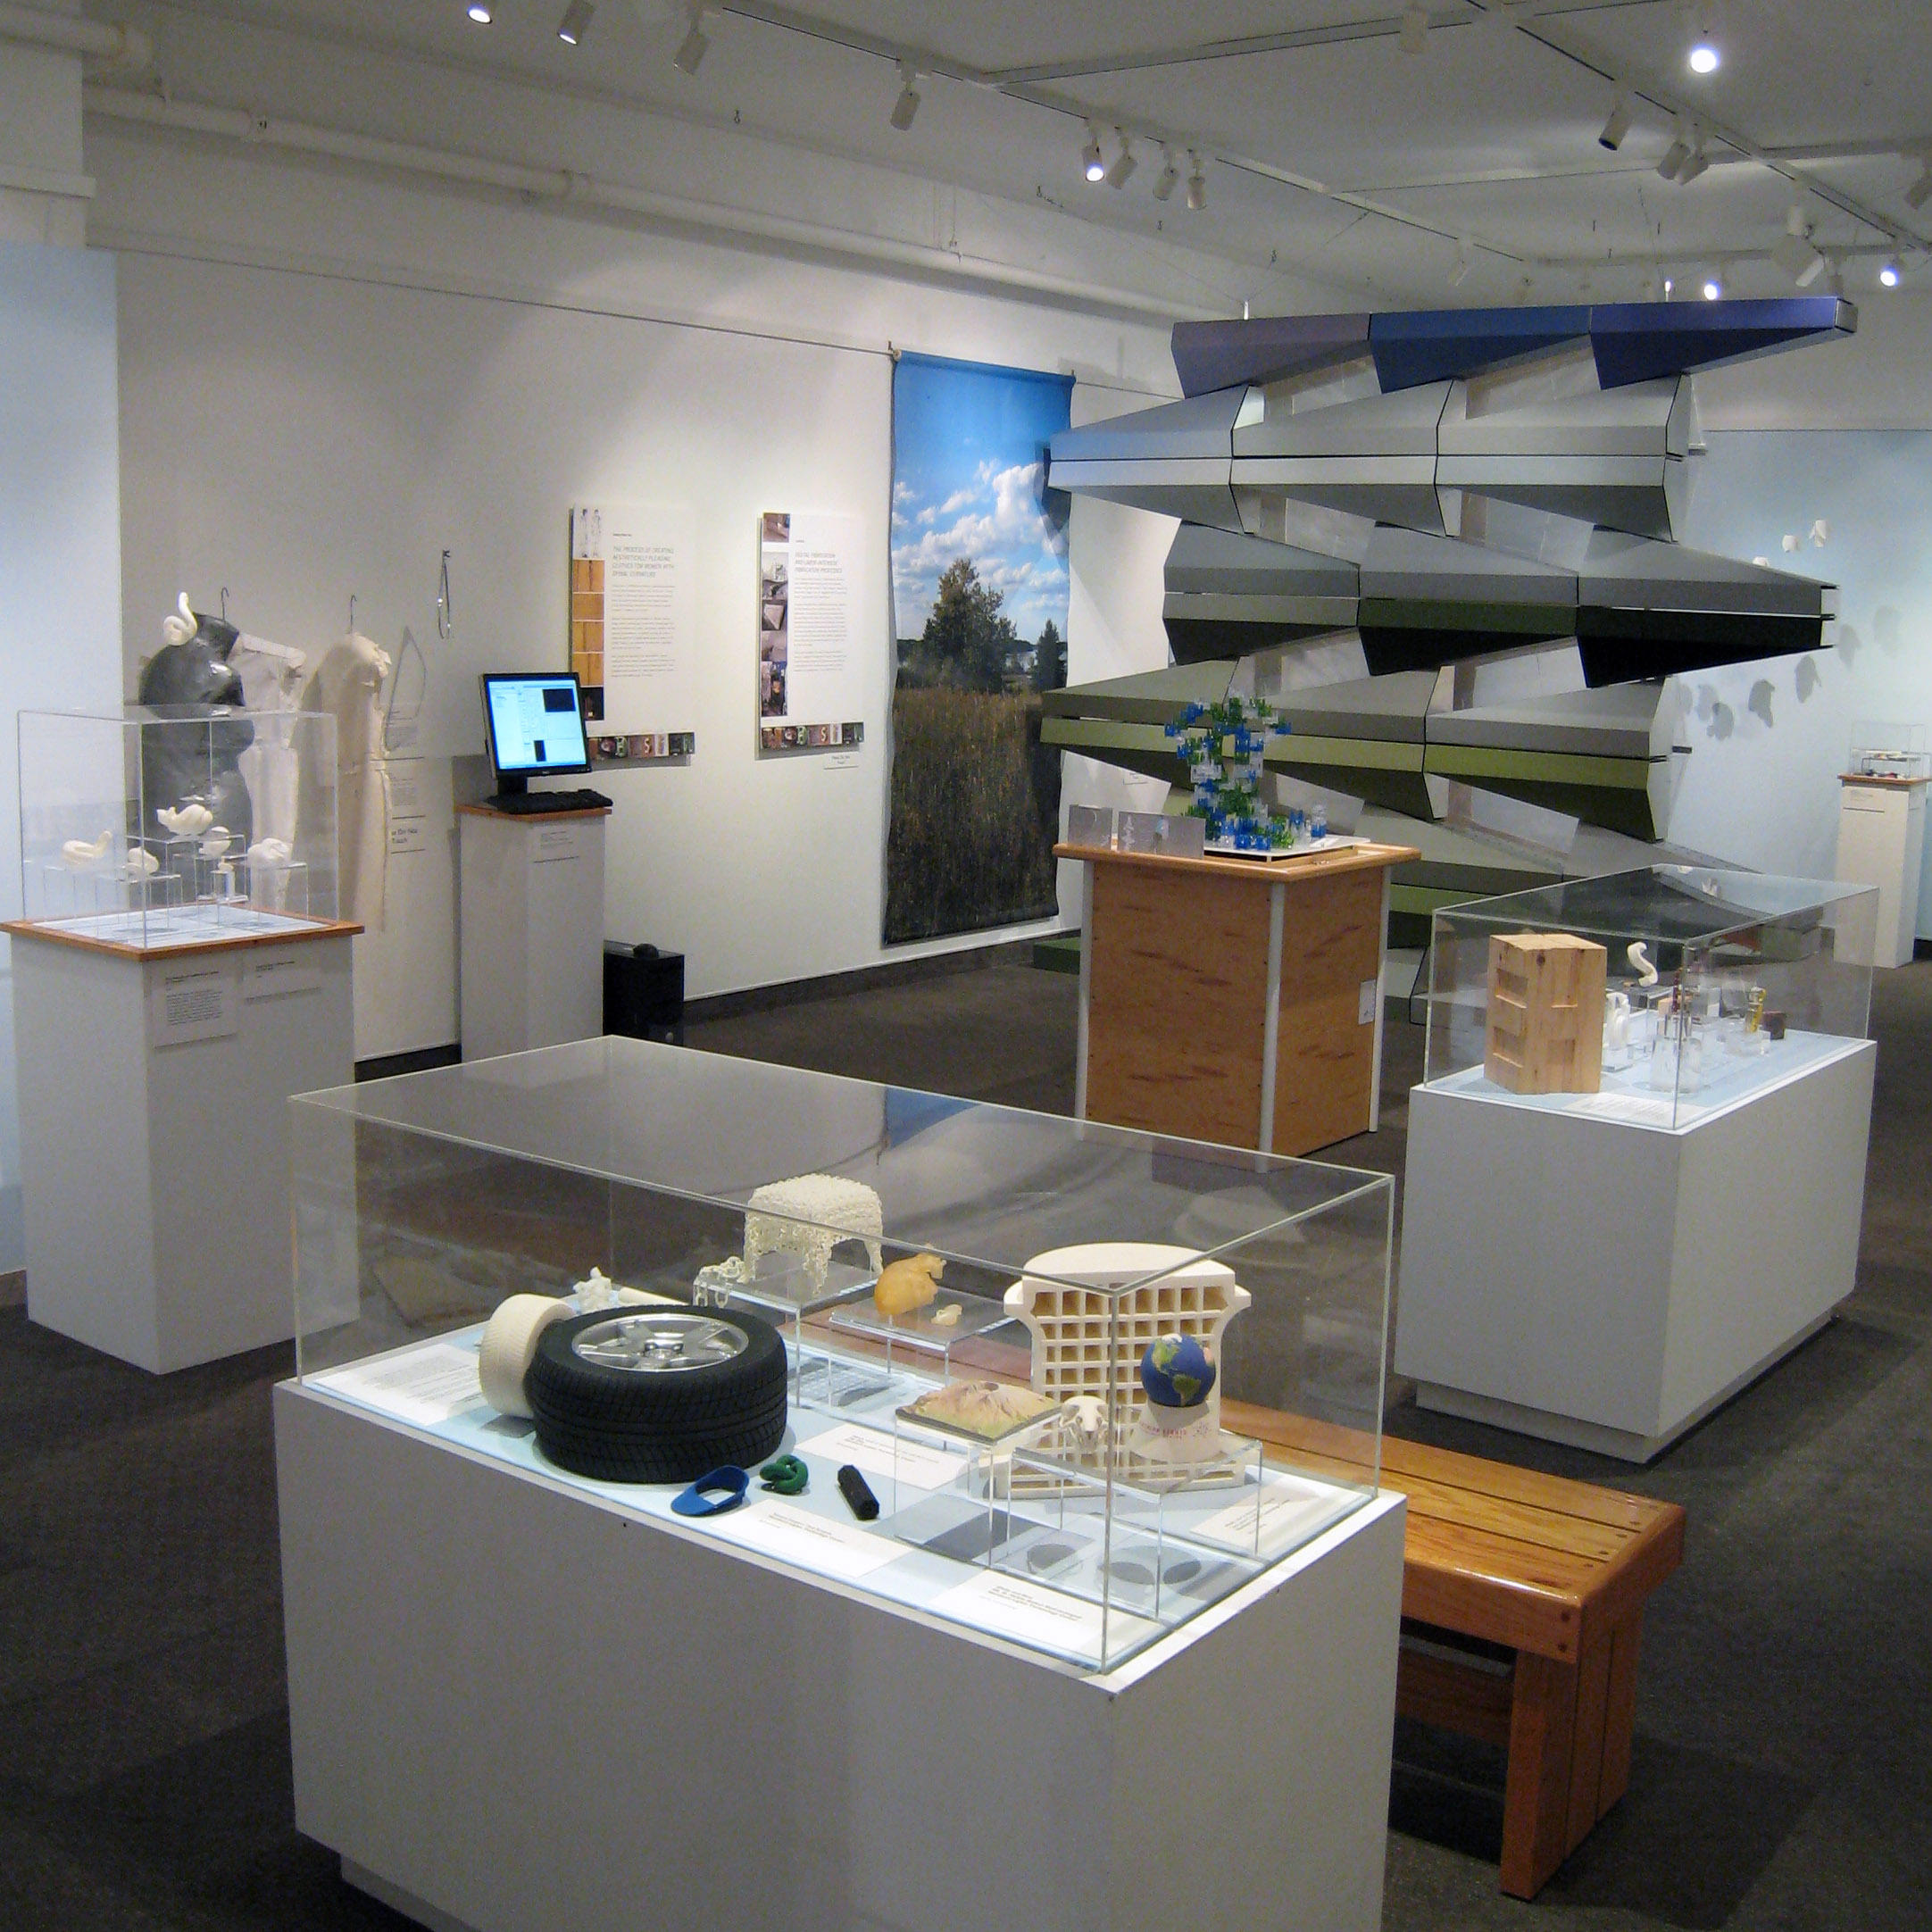 Here By Design III: Process And Prototype objects on display